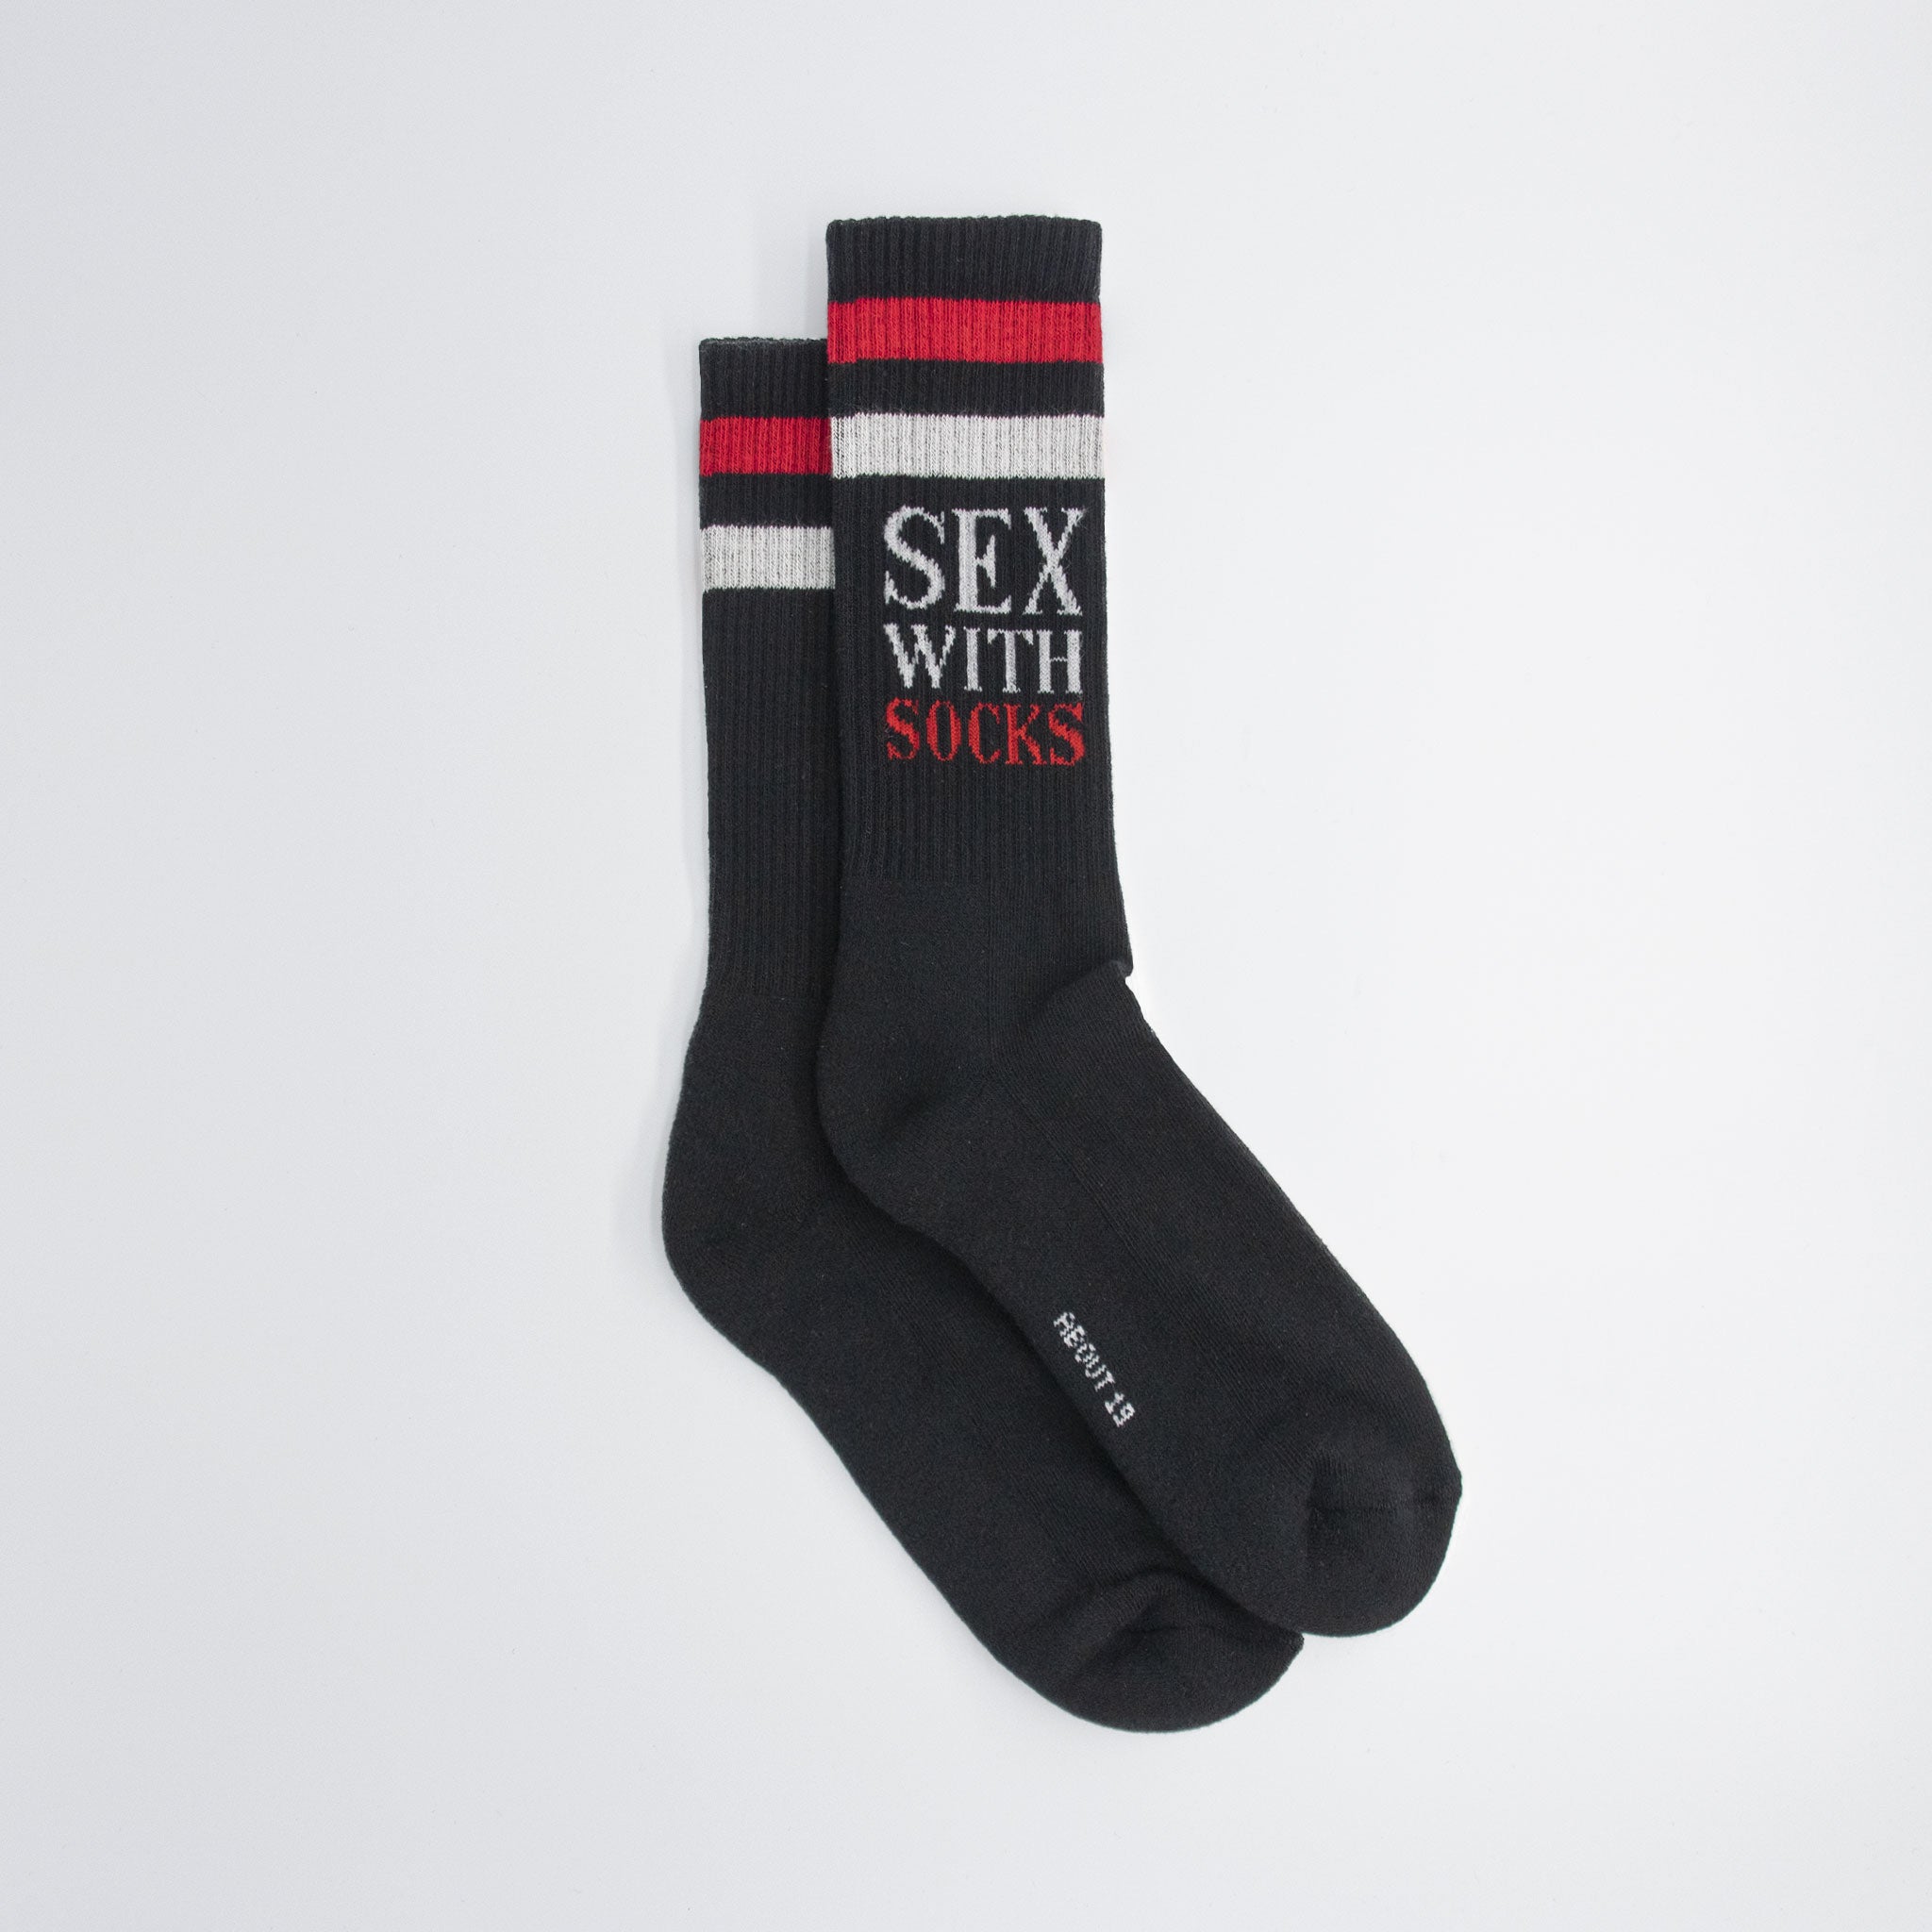 Sex With Socks image pic